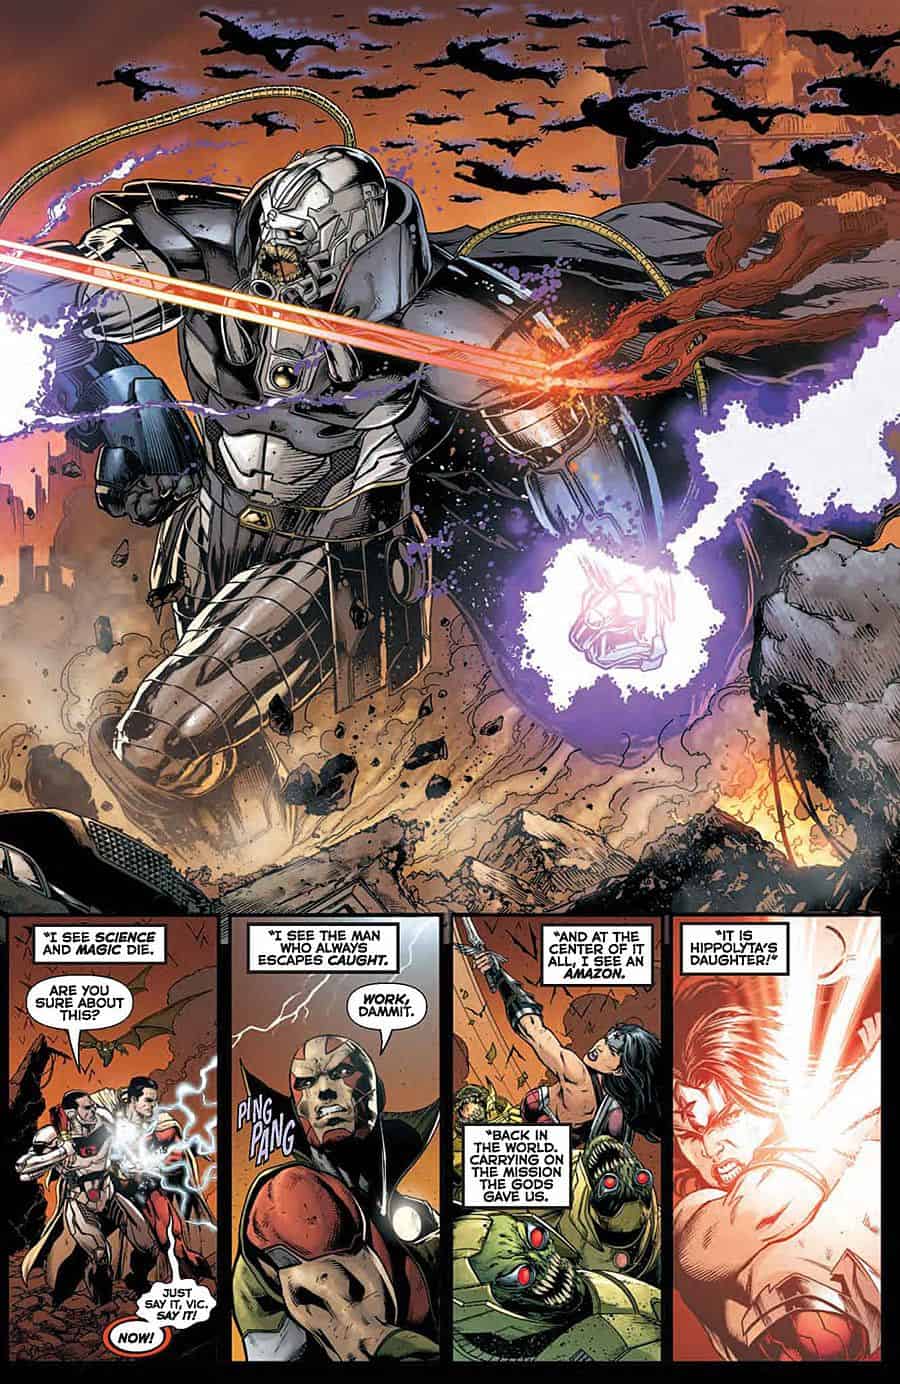 DIVERGENCE: JUSTICE LEAGUE - 'Darkseid War' prologue two: "T...